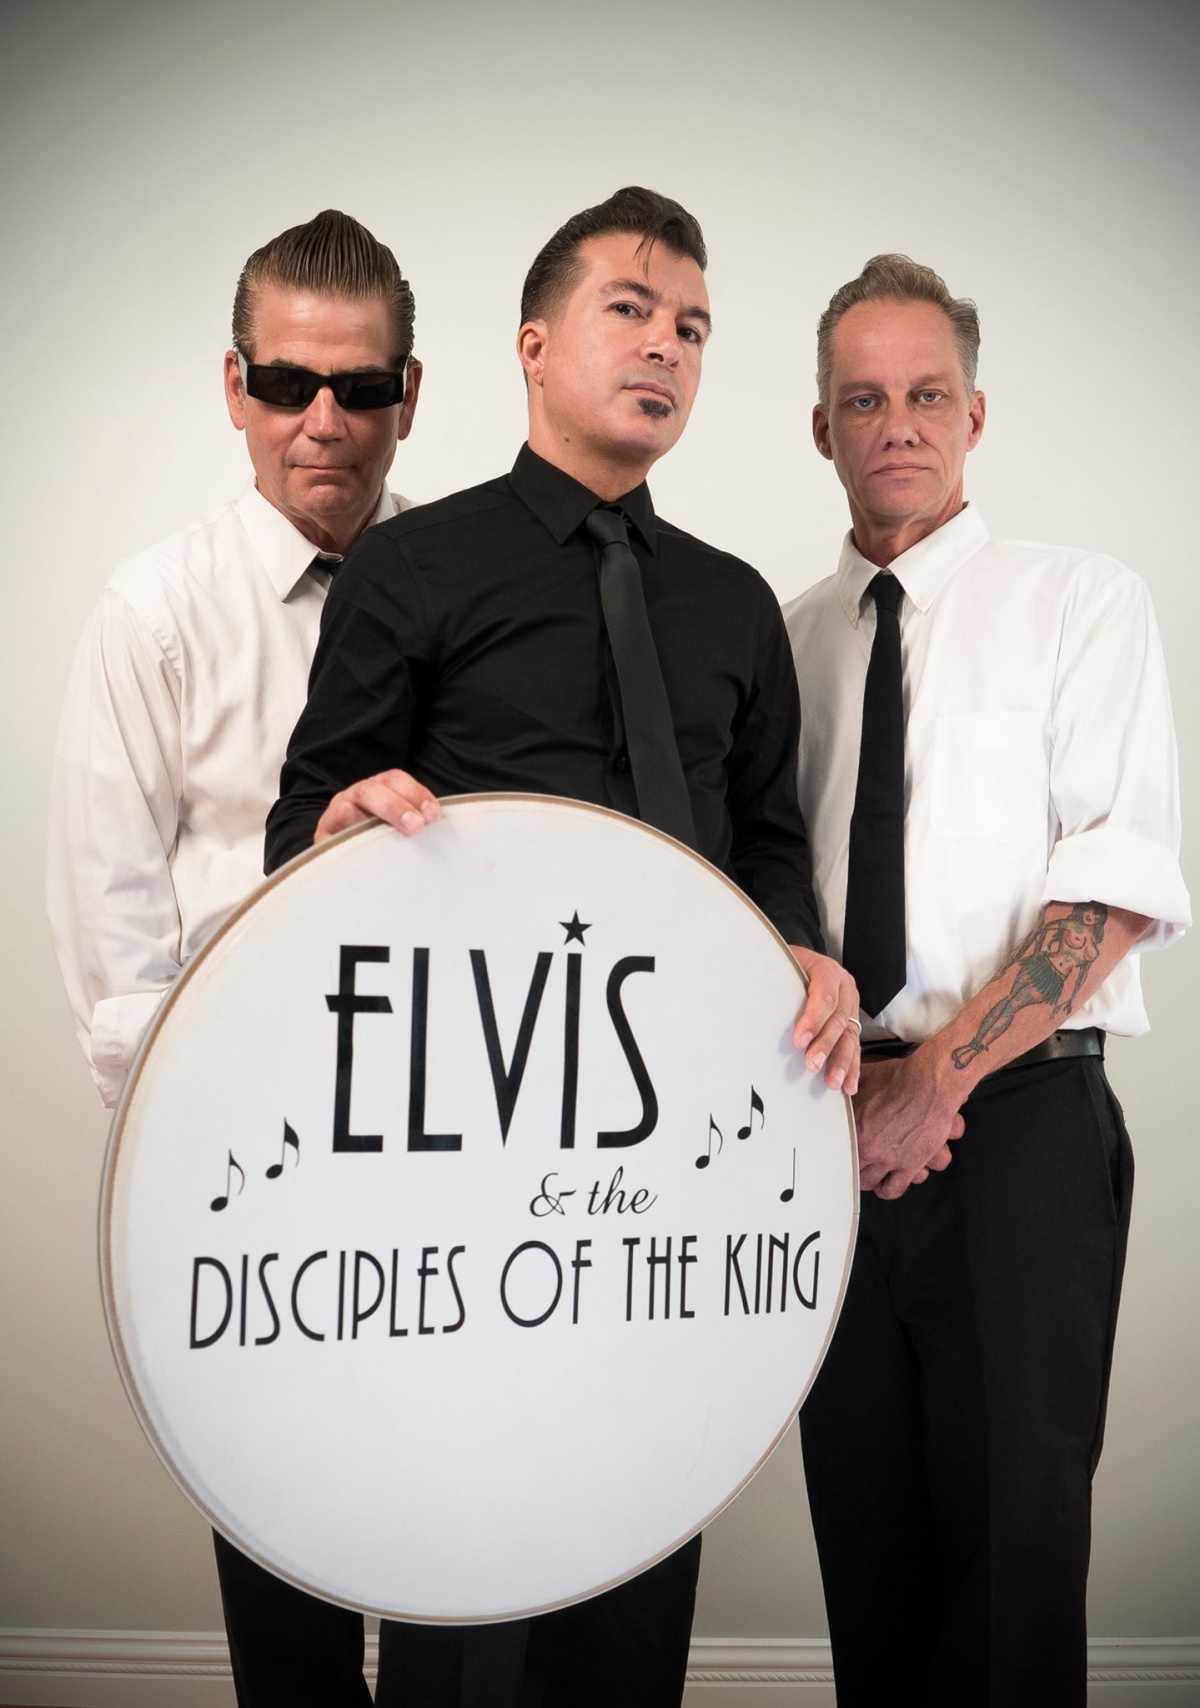 ELVIS & THE DISCIPLES OF THE KINGS